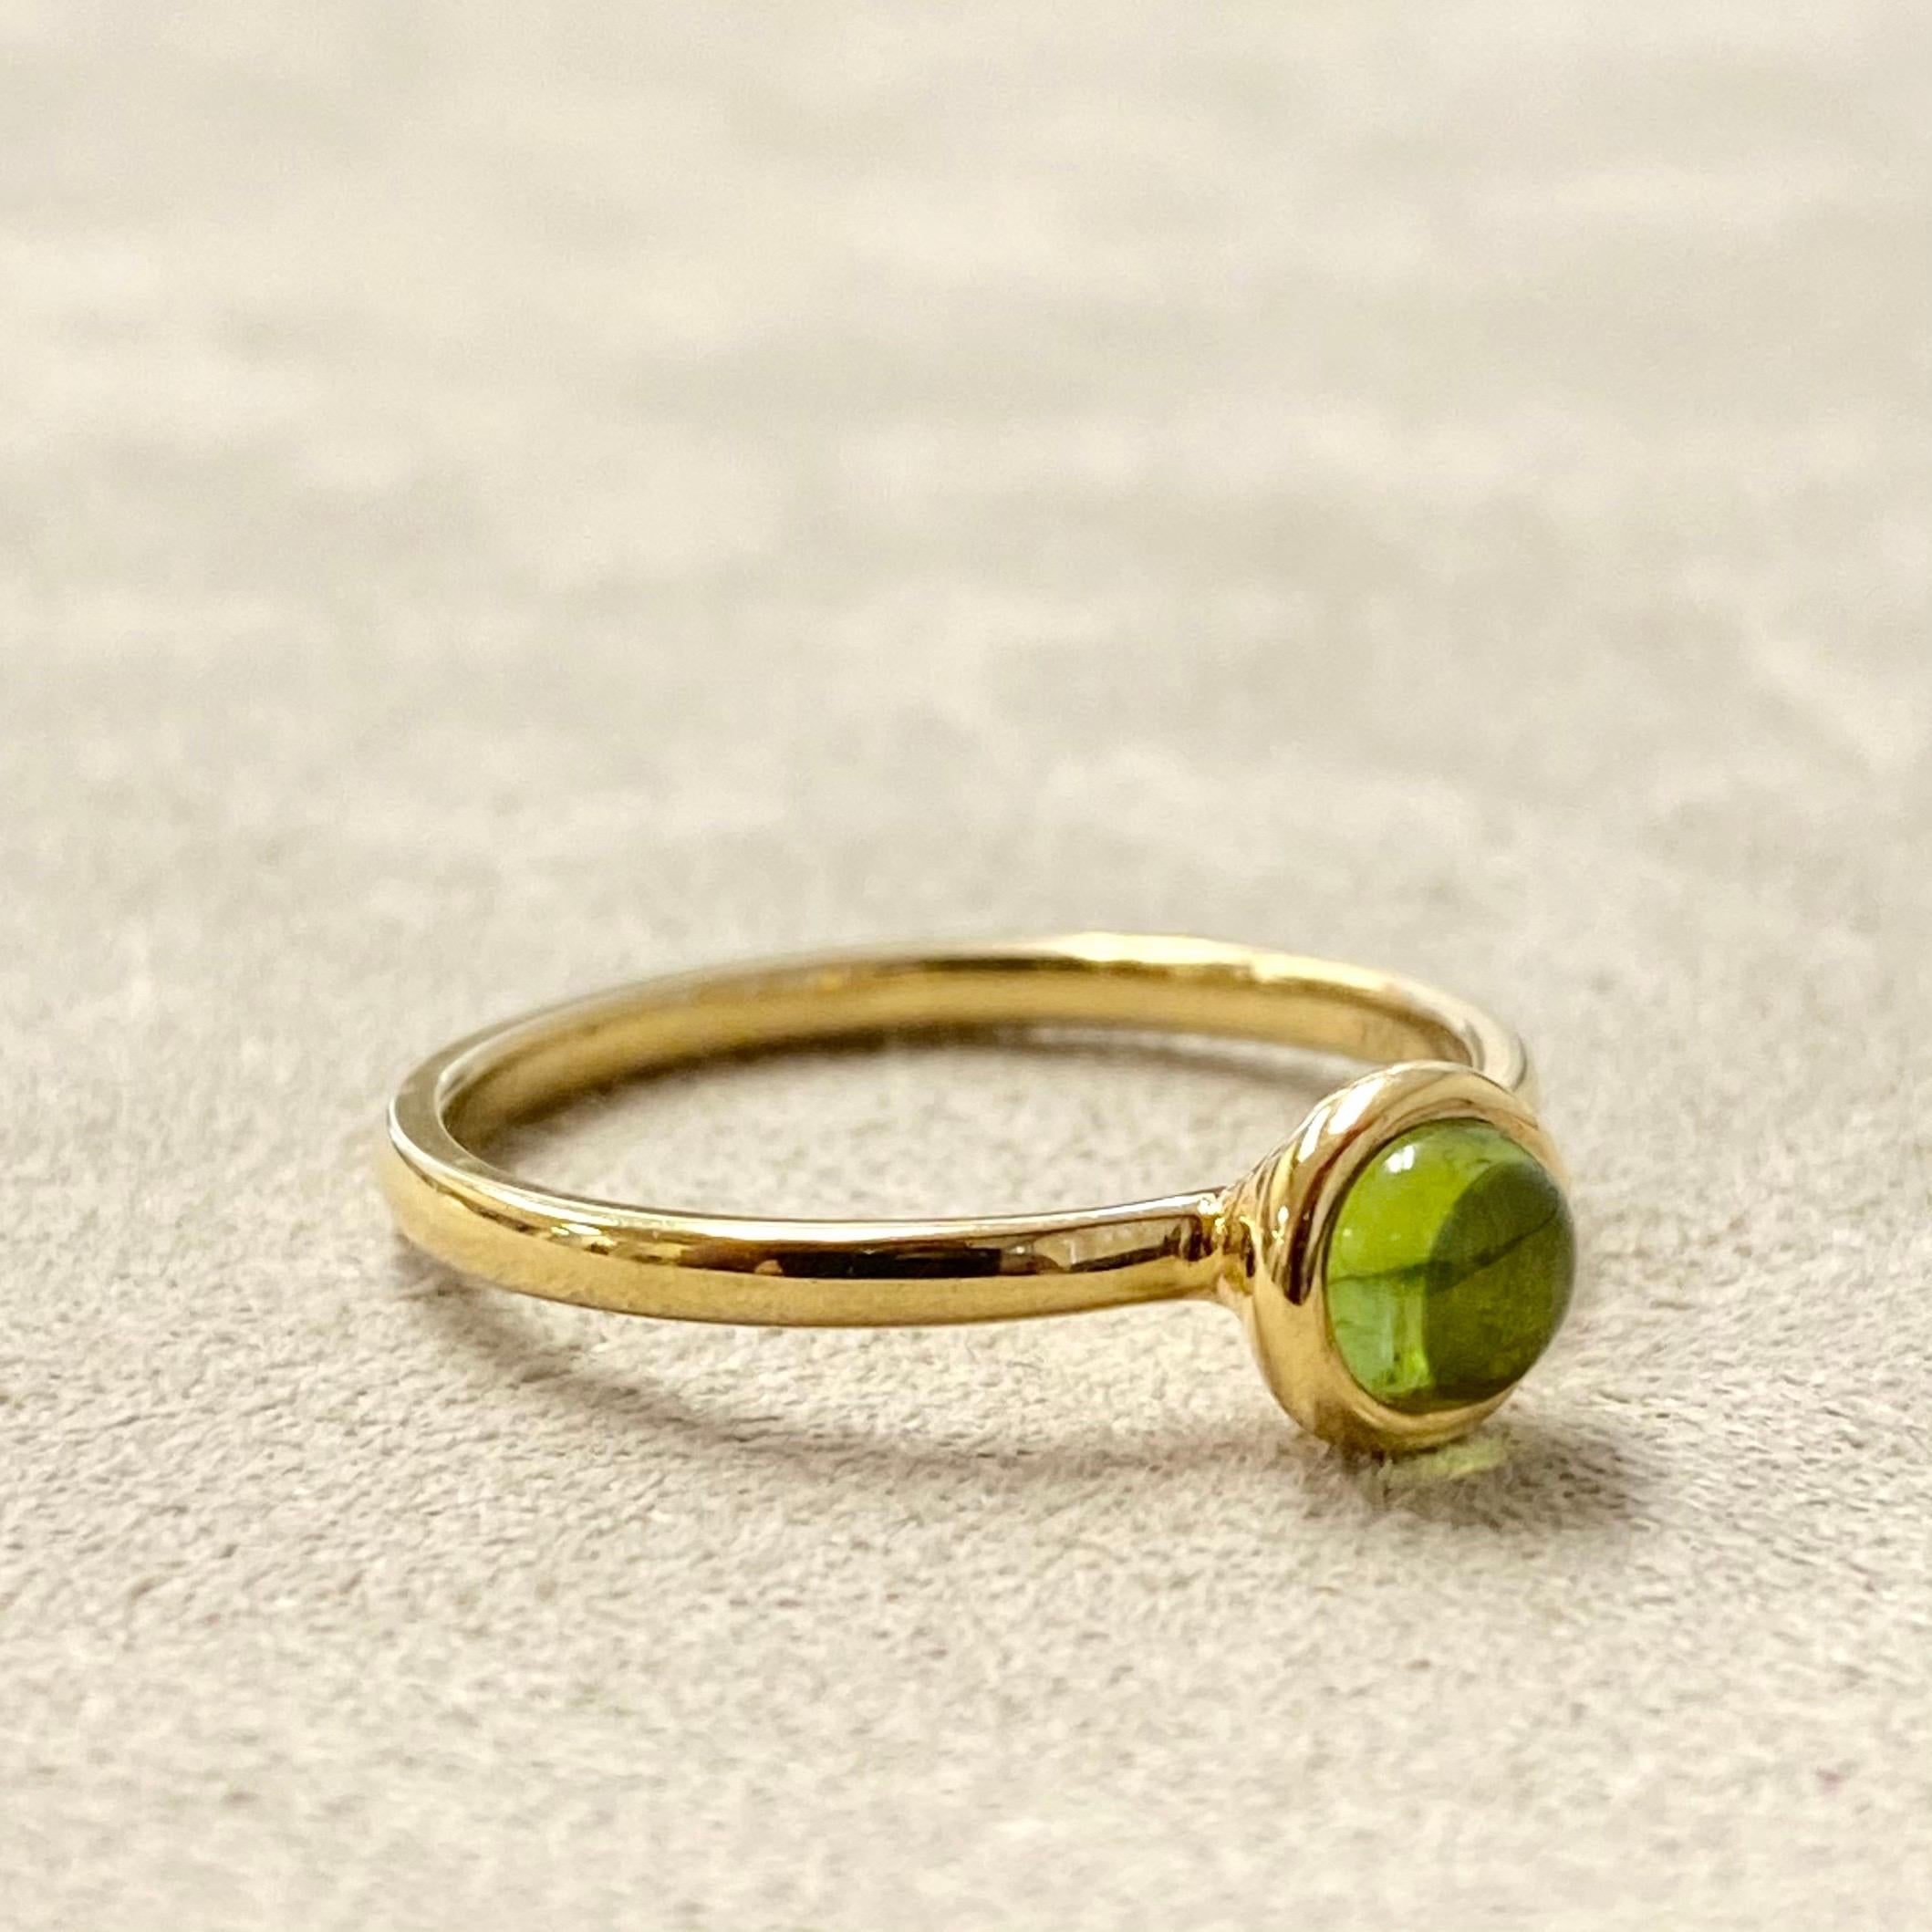 Created in 18 karat yellow gold
Peridot cabochon
Ring size US 6.5, can be sized upon request.

Masterfully wrought in 18 karat yellow gold, this ring showcases a gleaming peridot cabochon and can be resized to any desired ring size on